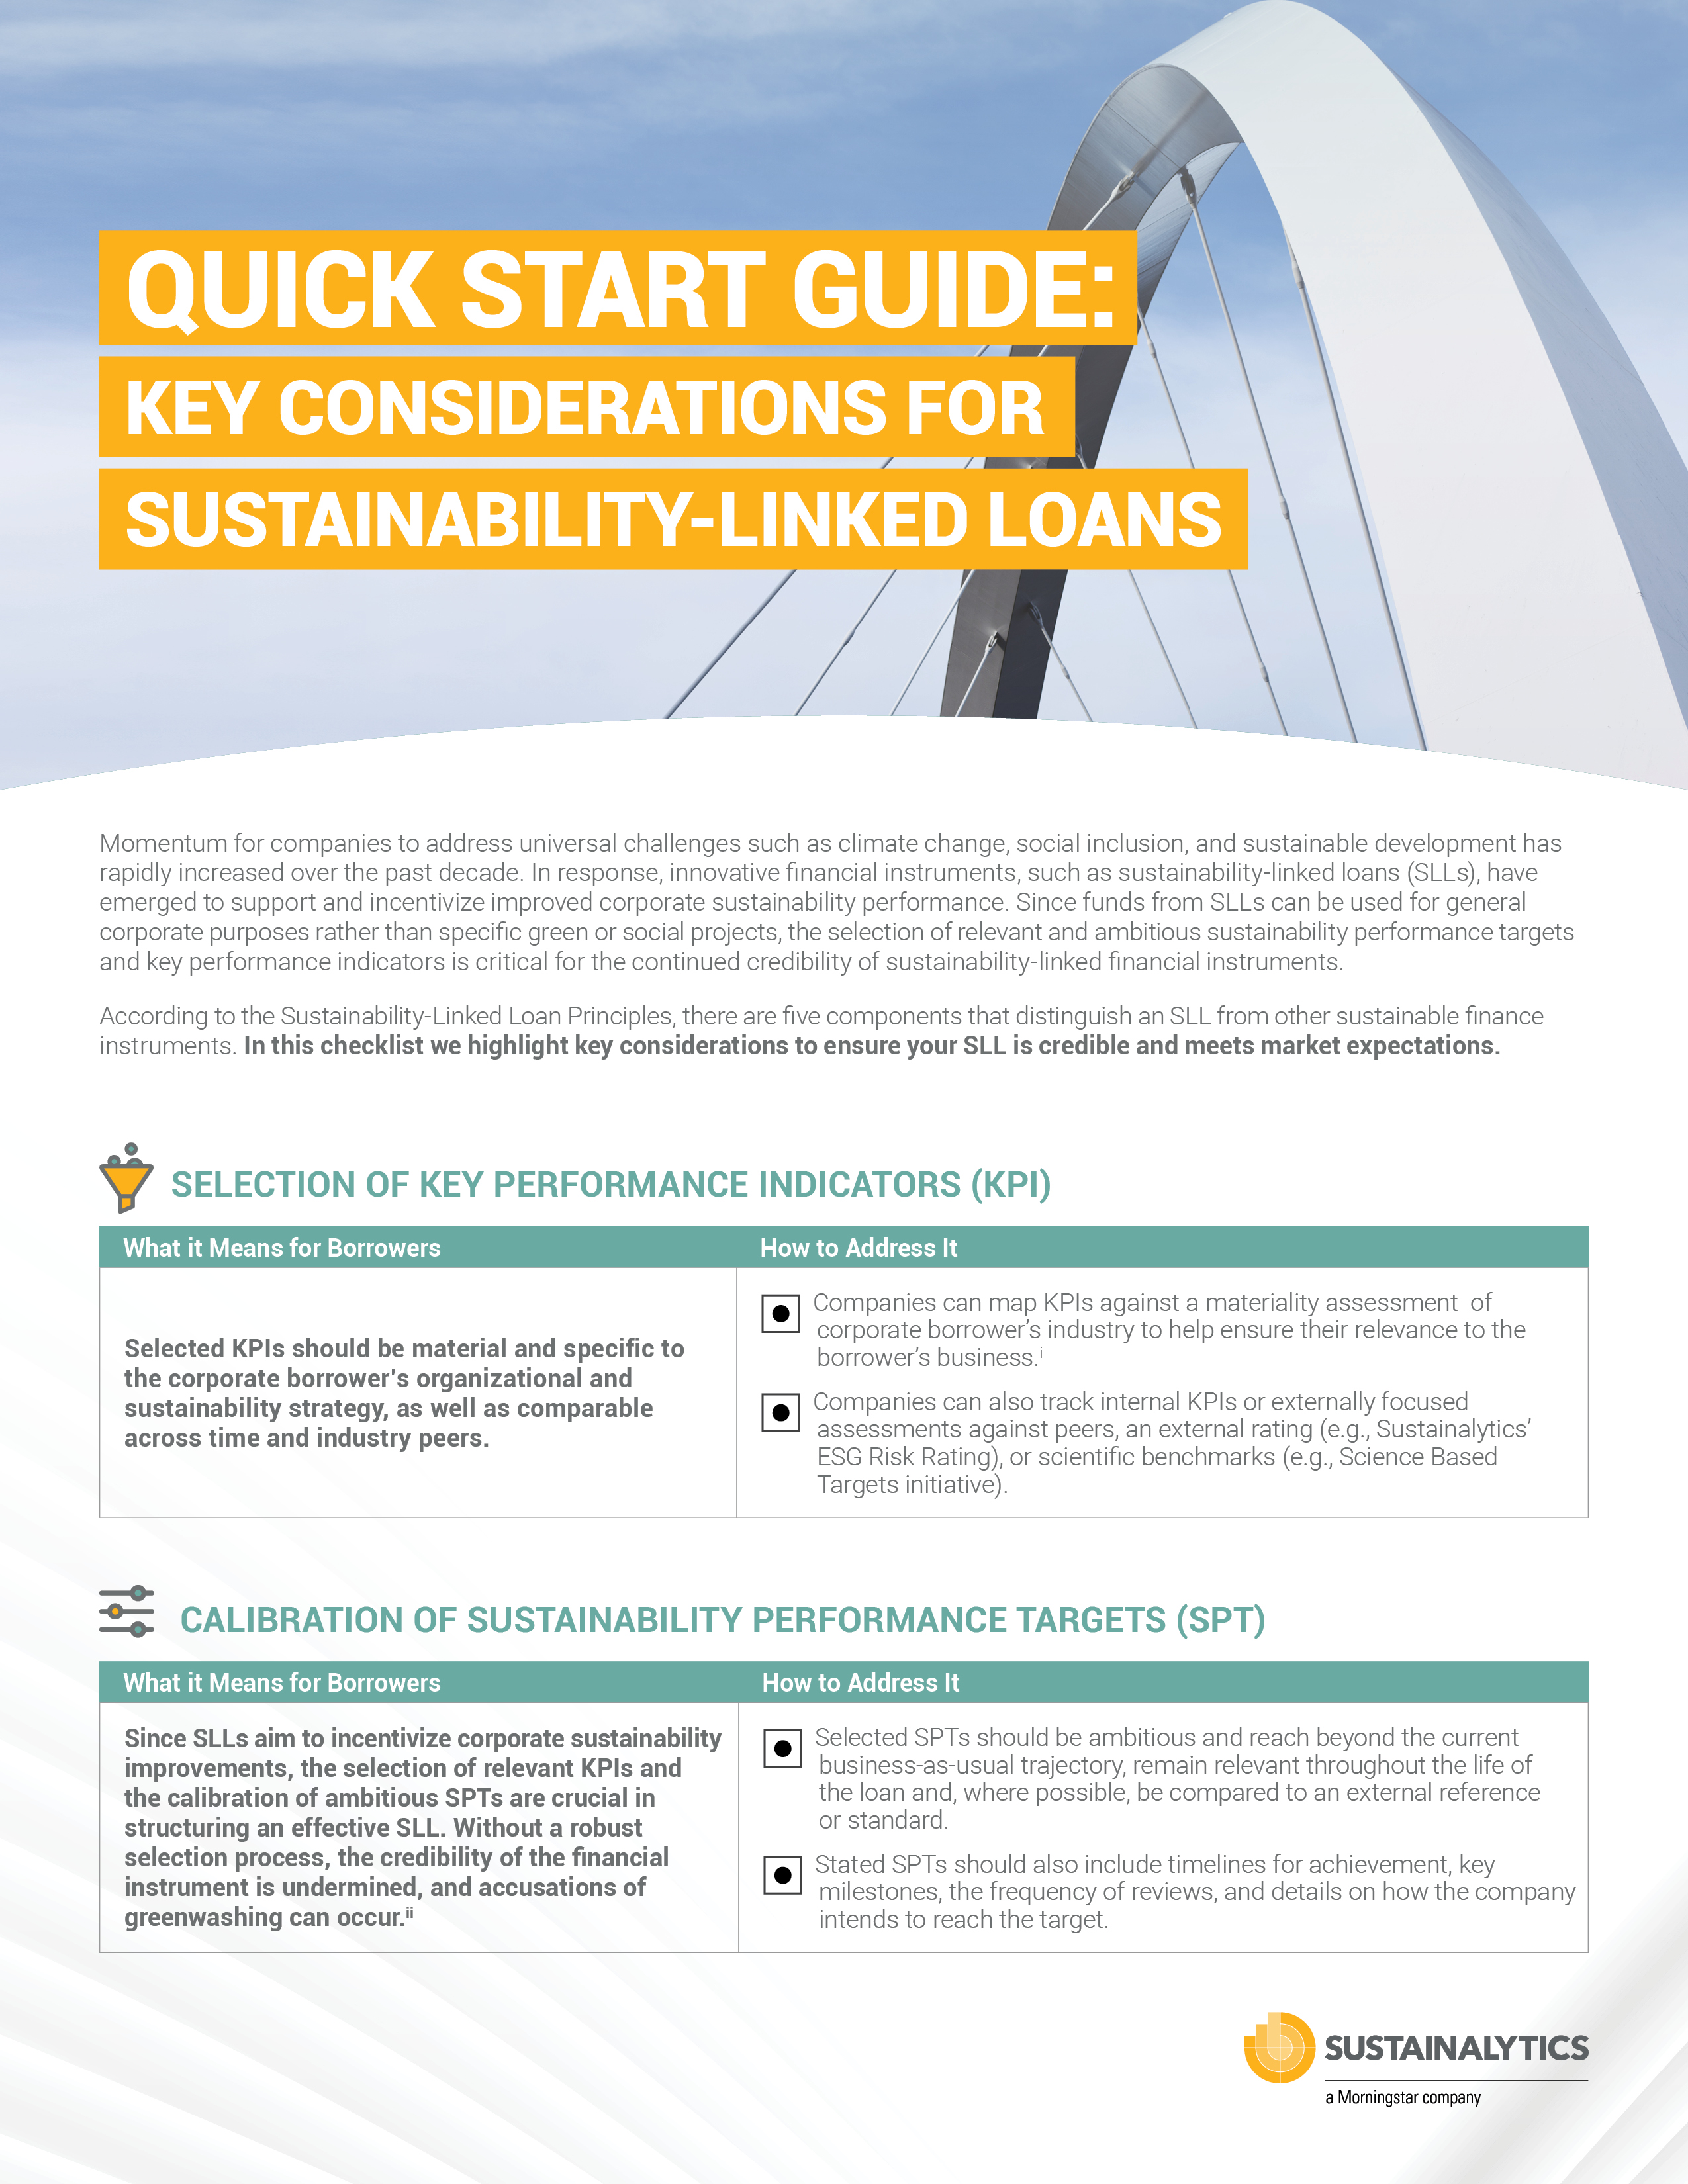 Quick Start Guide: Key Considerations for Sustainability-Linked Loans